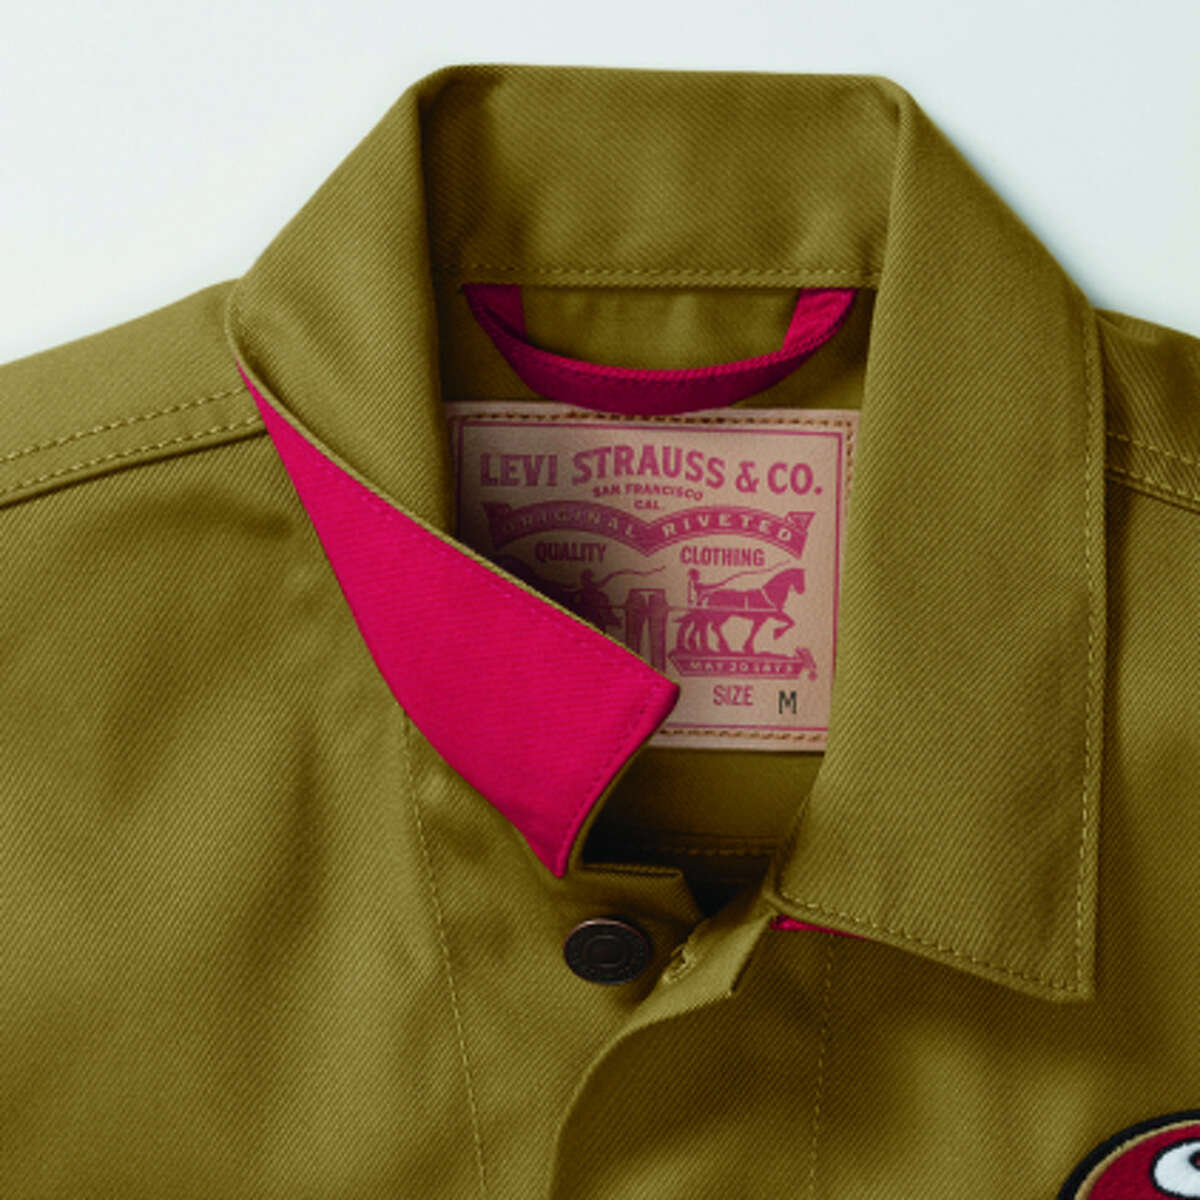 A look from the new Levi's X 49ers Collection. Available at select San Francisco Levi's stores, Levi.com, the 49ers Team Store at Levi's Stadium and 49ers Team Stores throughout the Bay Area.